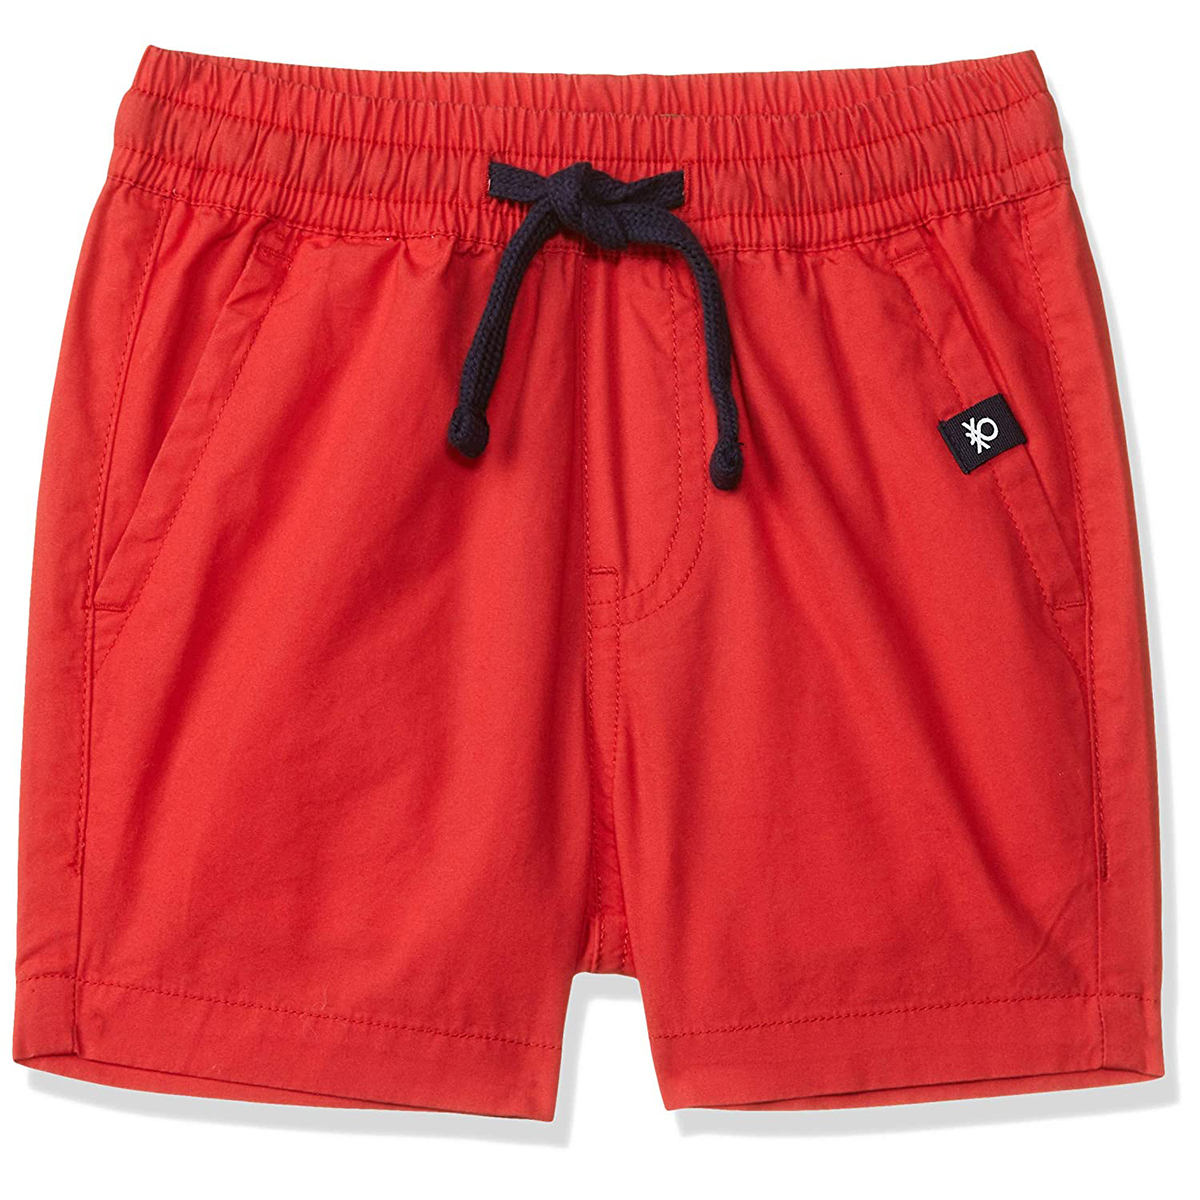 United Colors of Benetton Boy's Regular Fit Cotton Shorts- Red